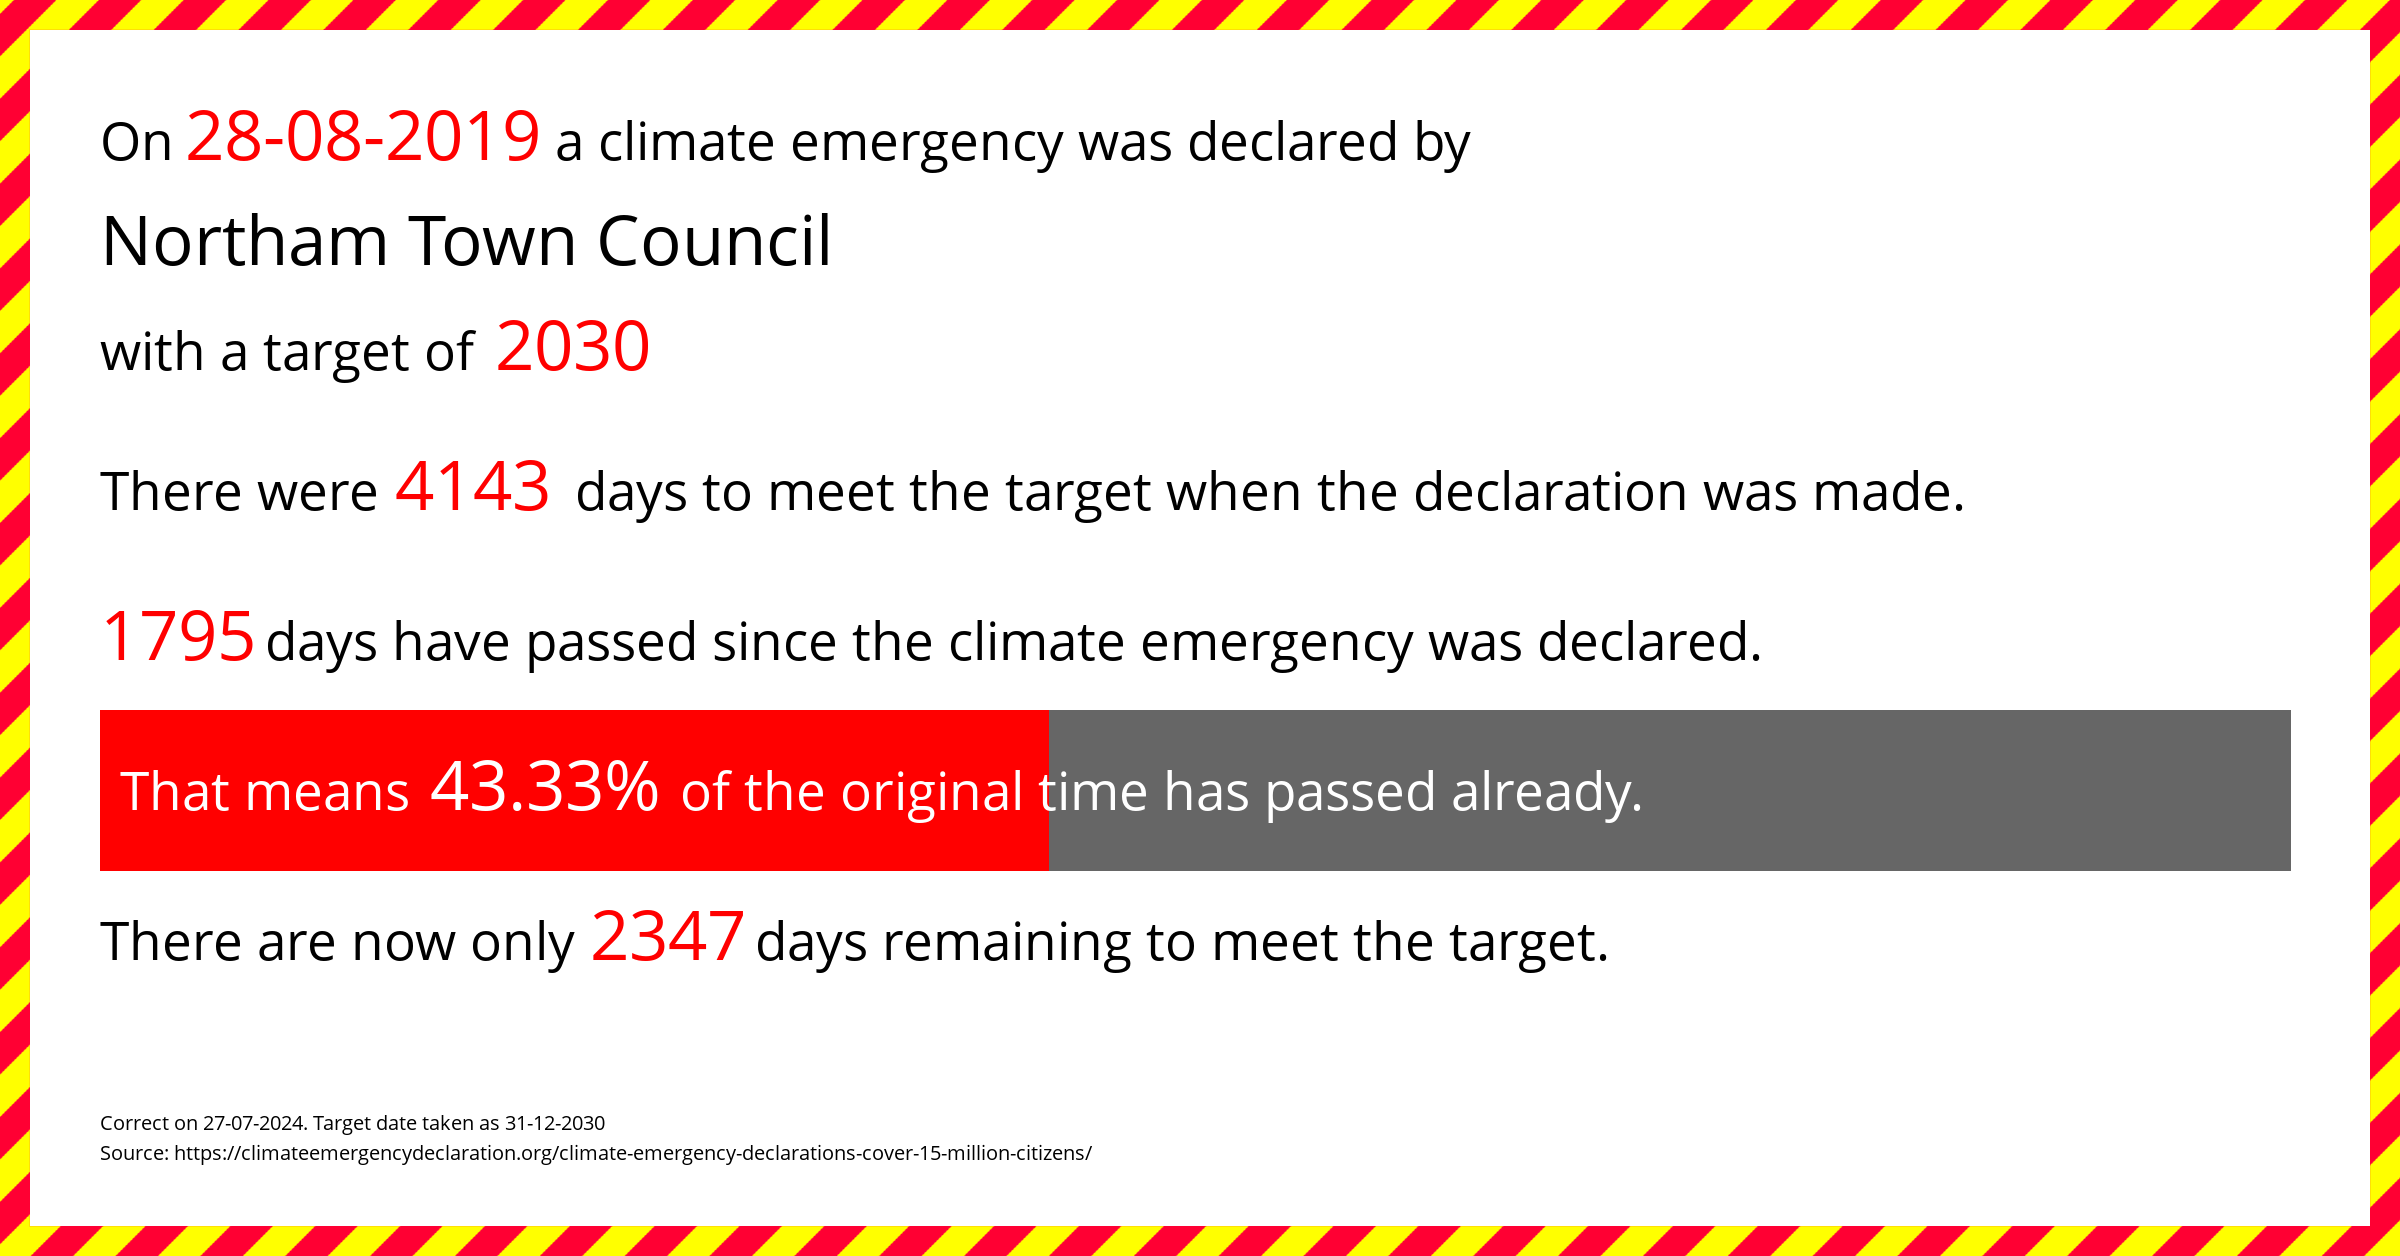 Northam Town Council  declared a Climate emergency on Wednesday 28th August 2019, with a target of 2030.